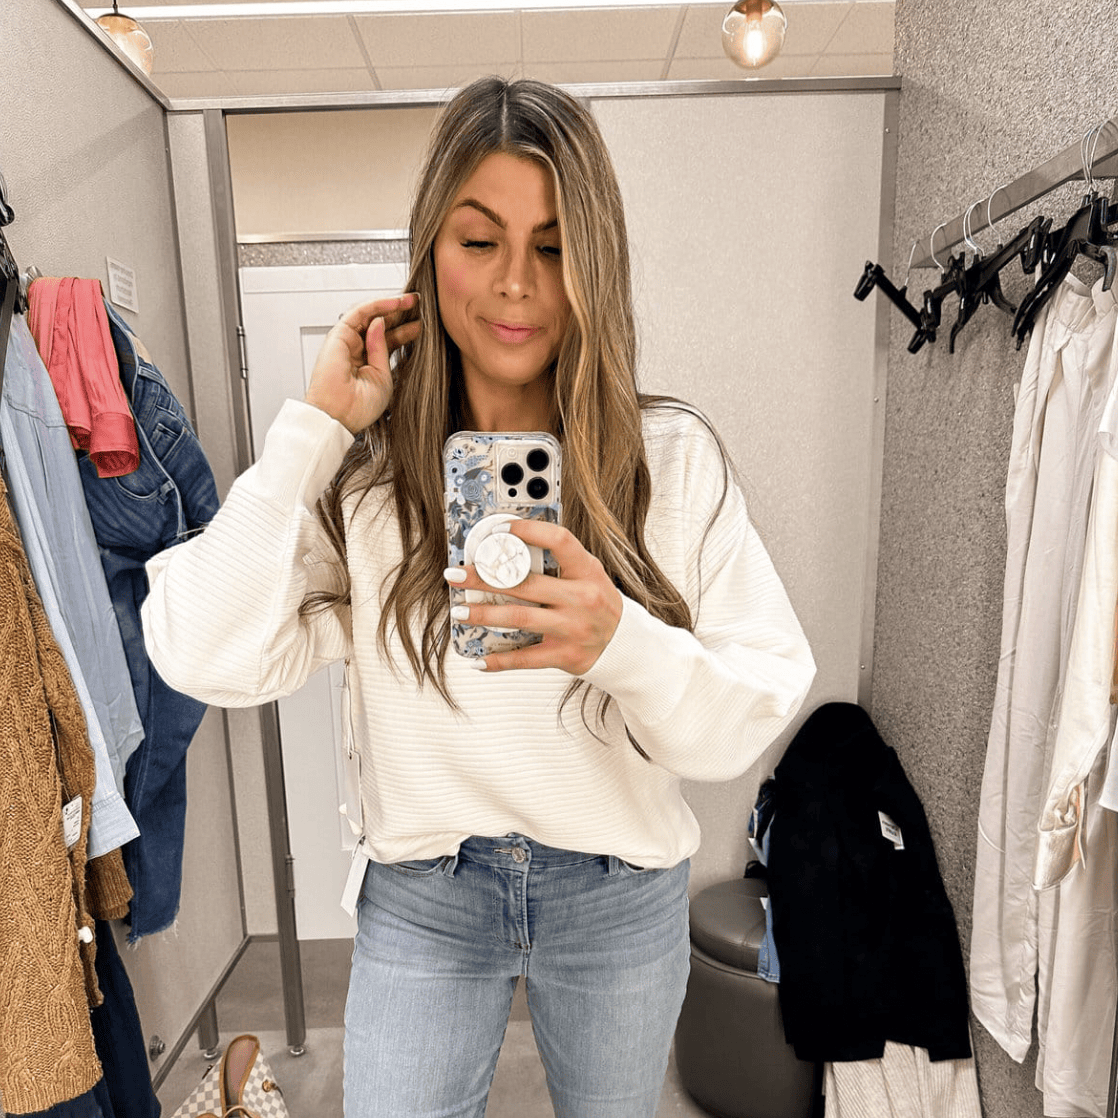 9 Nordstrom Anniversary Sale Outfit Ideas (feat. Best Sellers!)